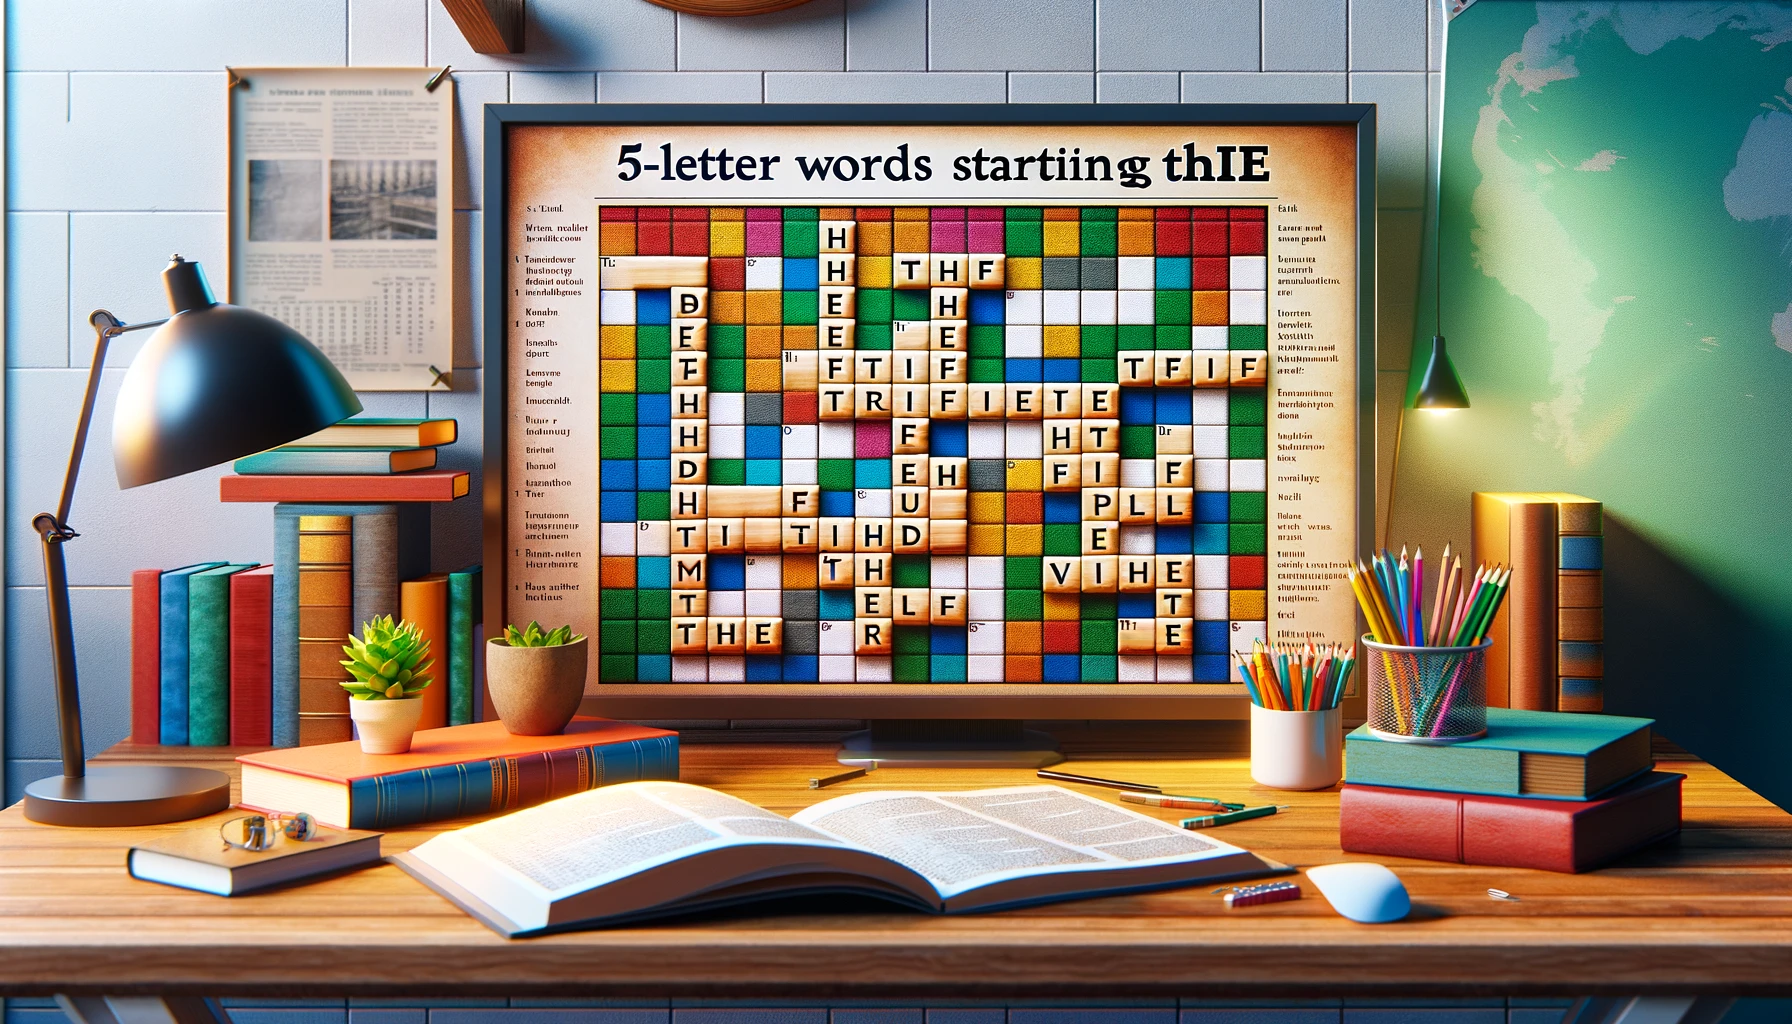 5-letter words starting with thie